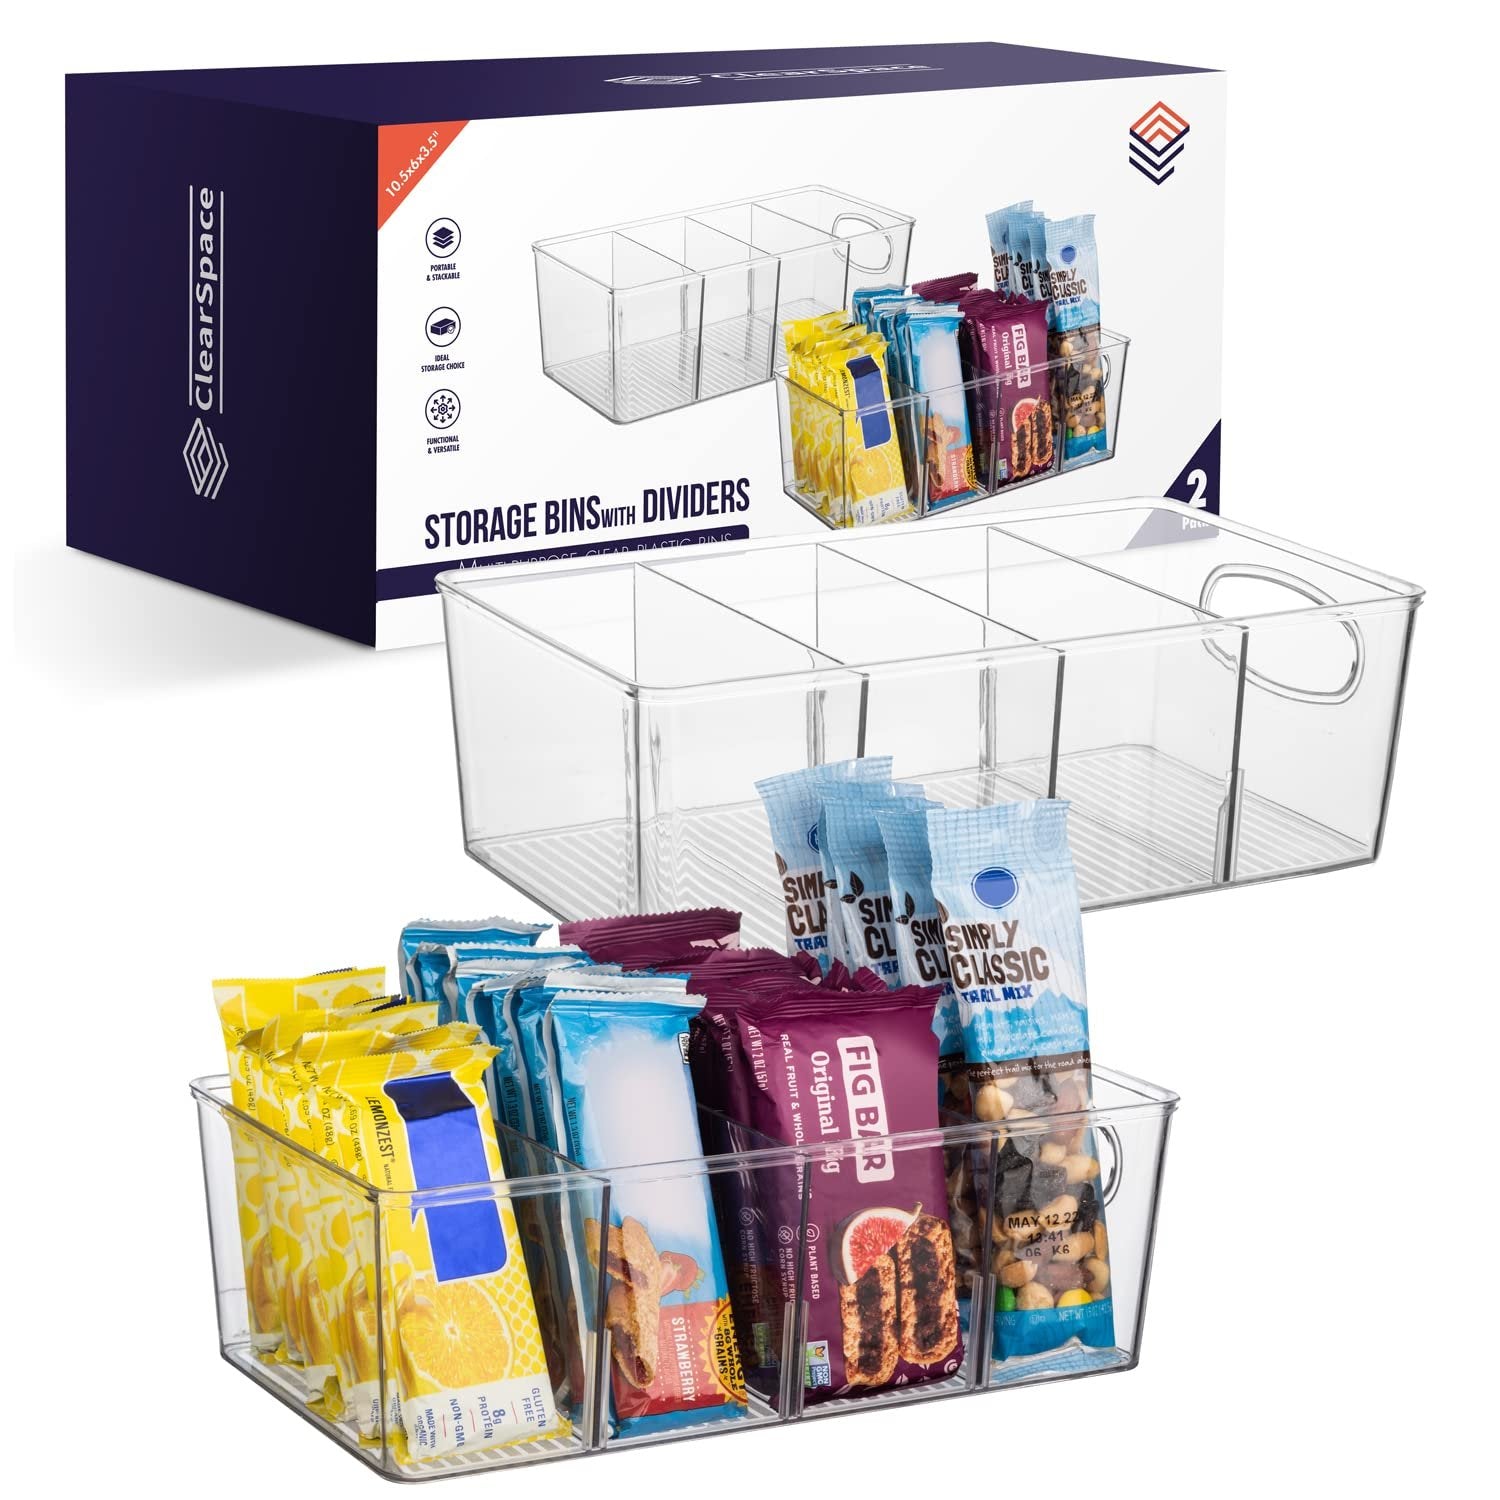 ClearSpace Plastic Pantry Organization and Storage Bins with Removable Dividers - Perfect Kitchen Organization or Kitchen Storage - Refrigerator Organizer Bins, Cabinet Organizers (2 Pack)